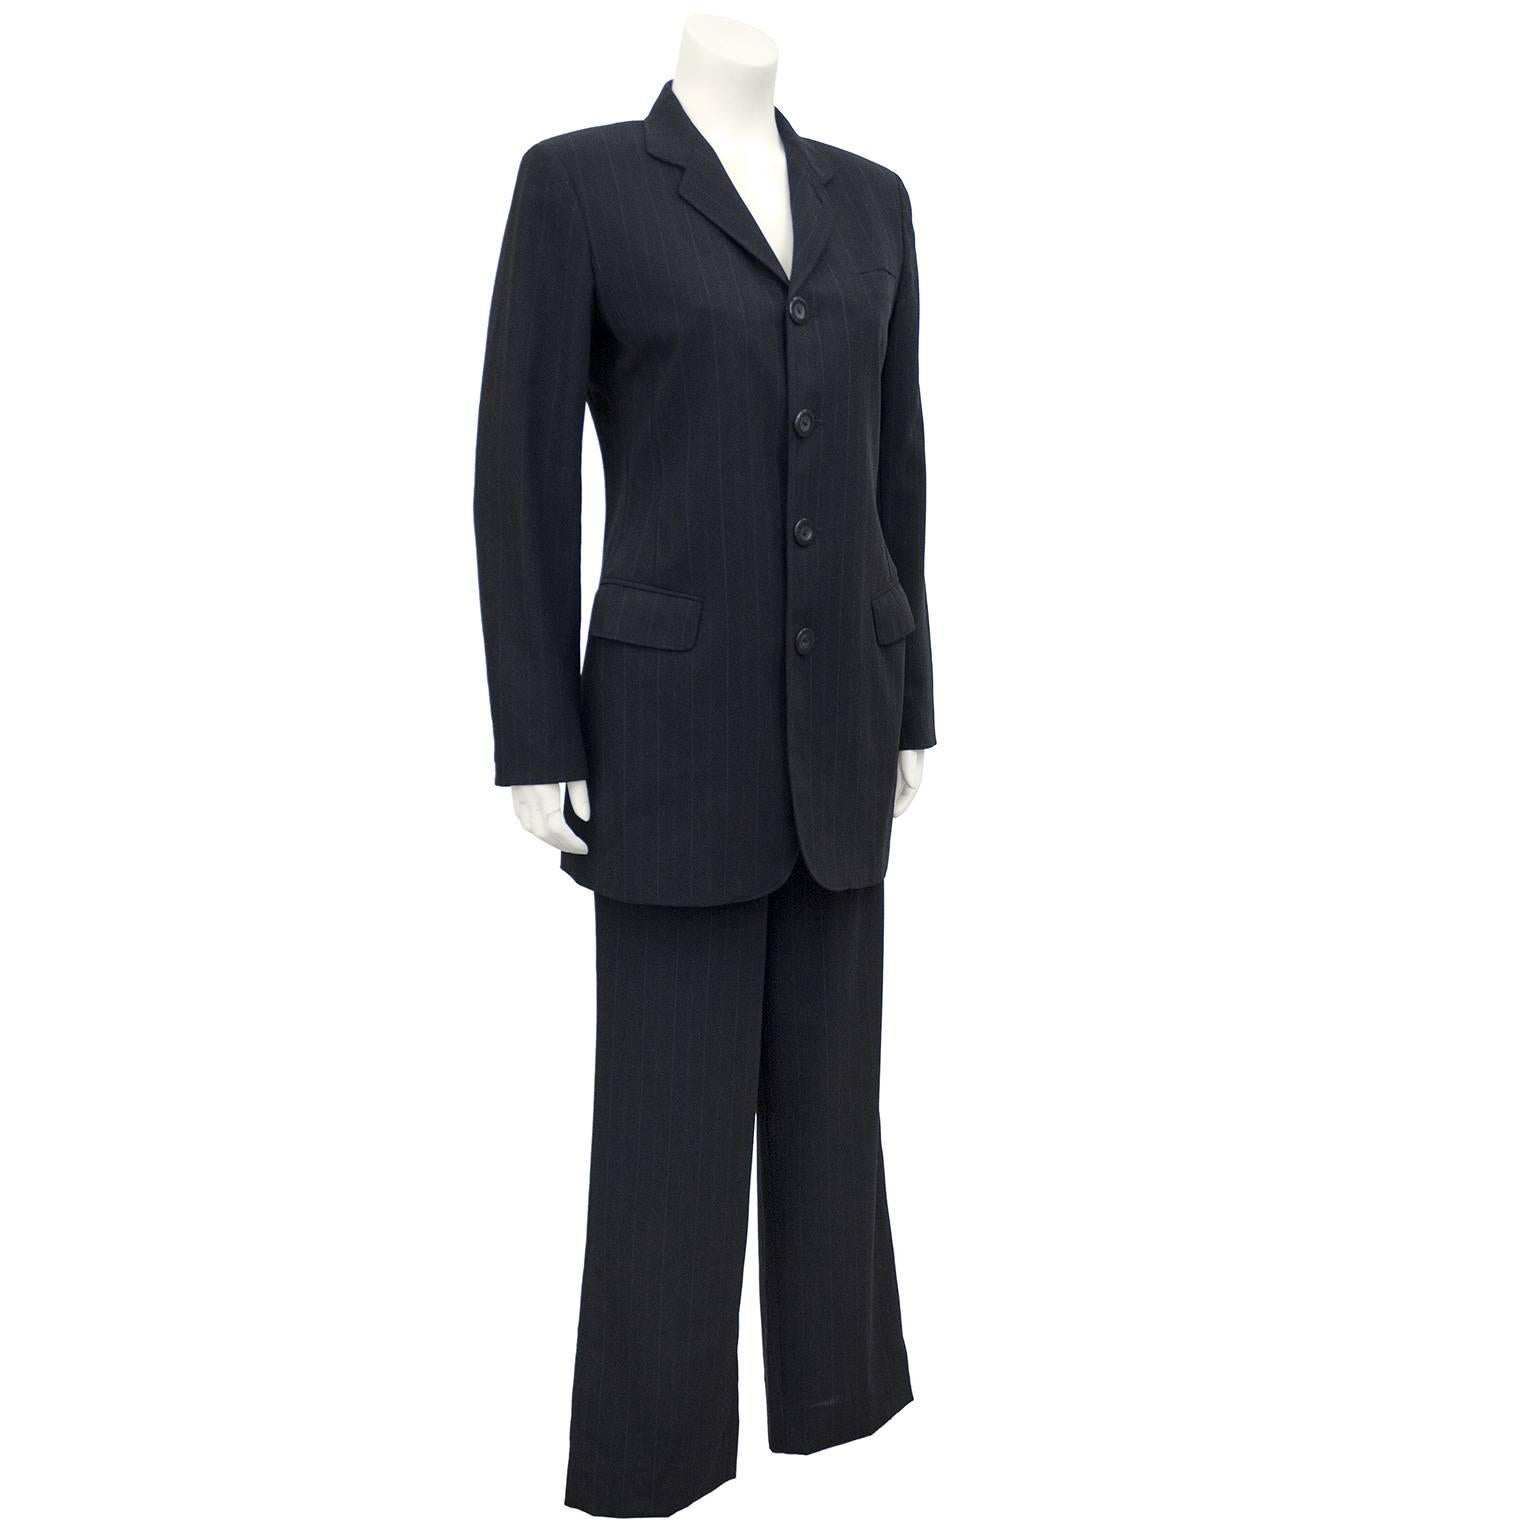 1990s Jean Paul Gaultier Femme charcoal grey wool pinstripe pantsuit. Long single breasted riding style jacket with large, round plastic buttons. One slit pocket at bust and two patch flap pockets at hips. High waisted, flat front trousers with a